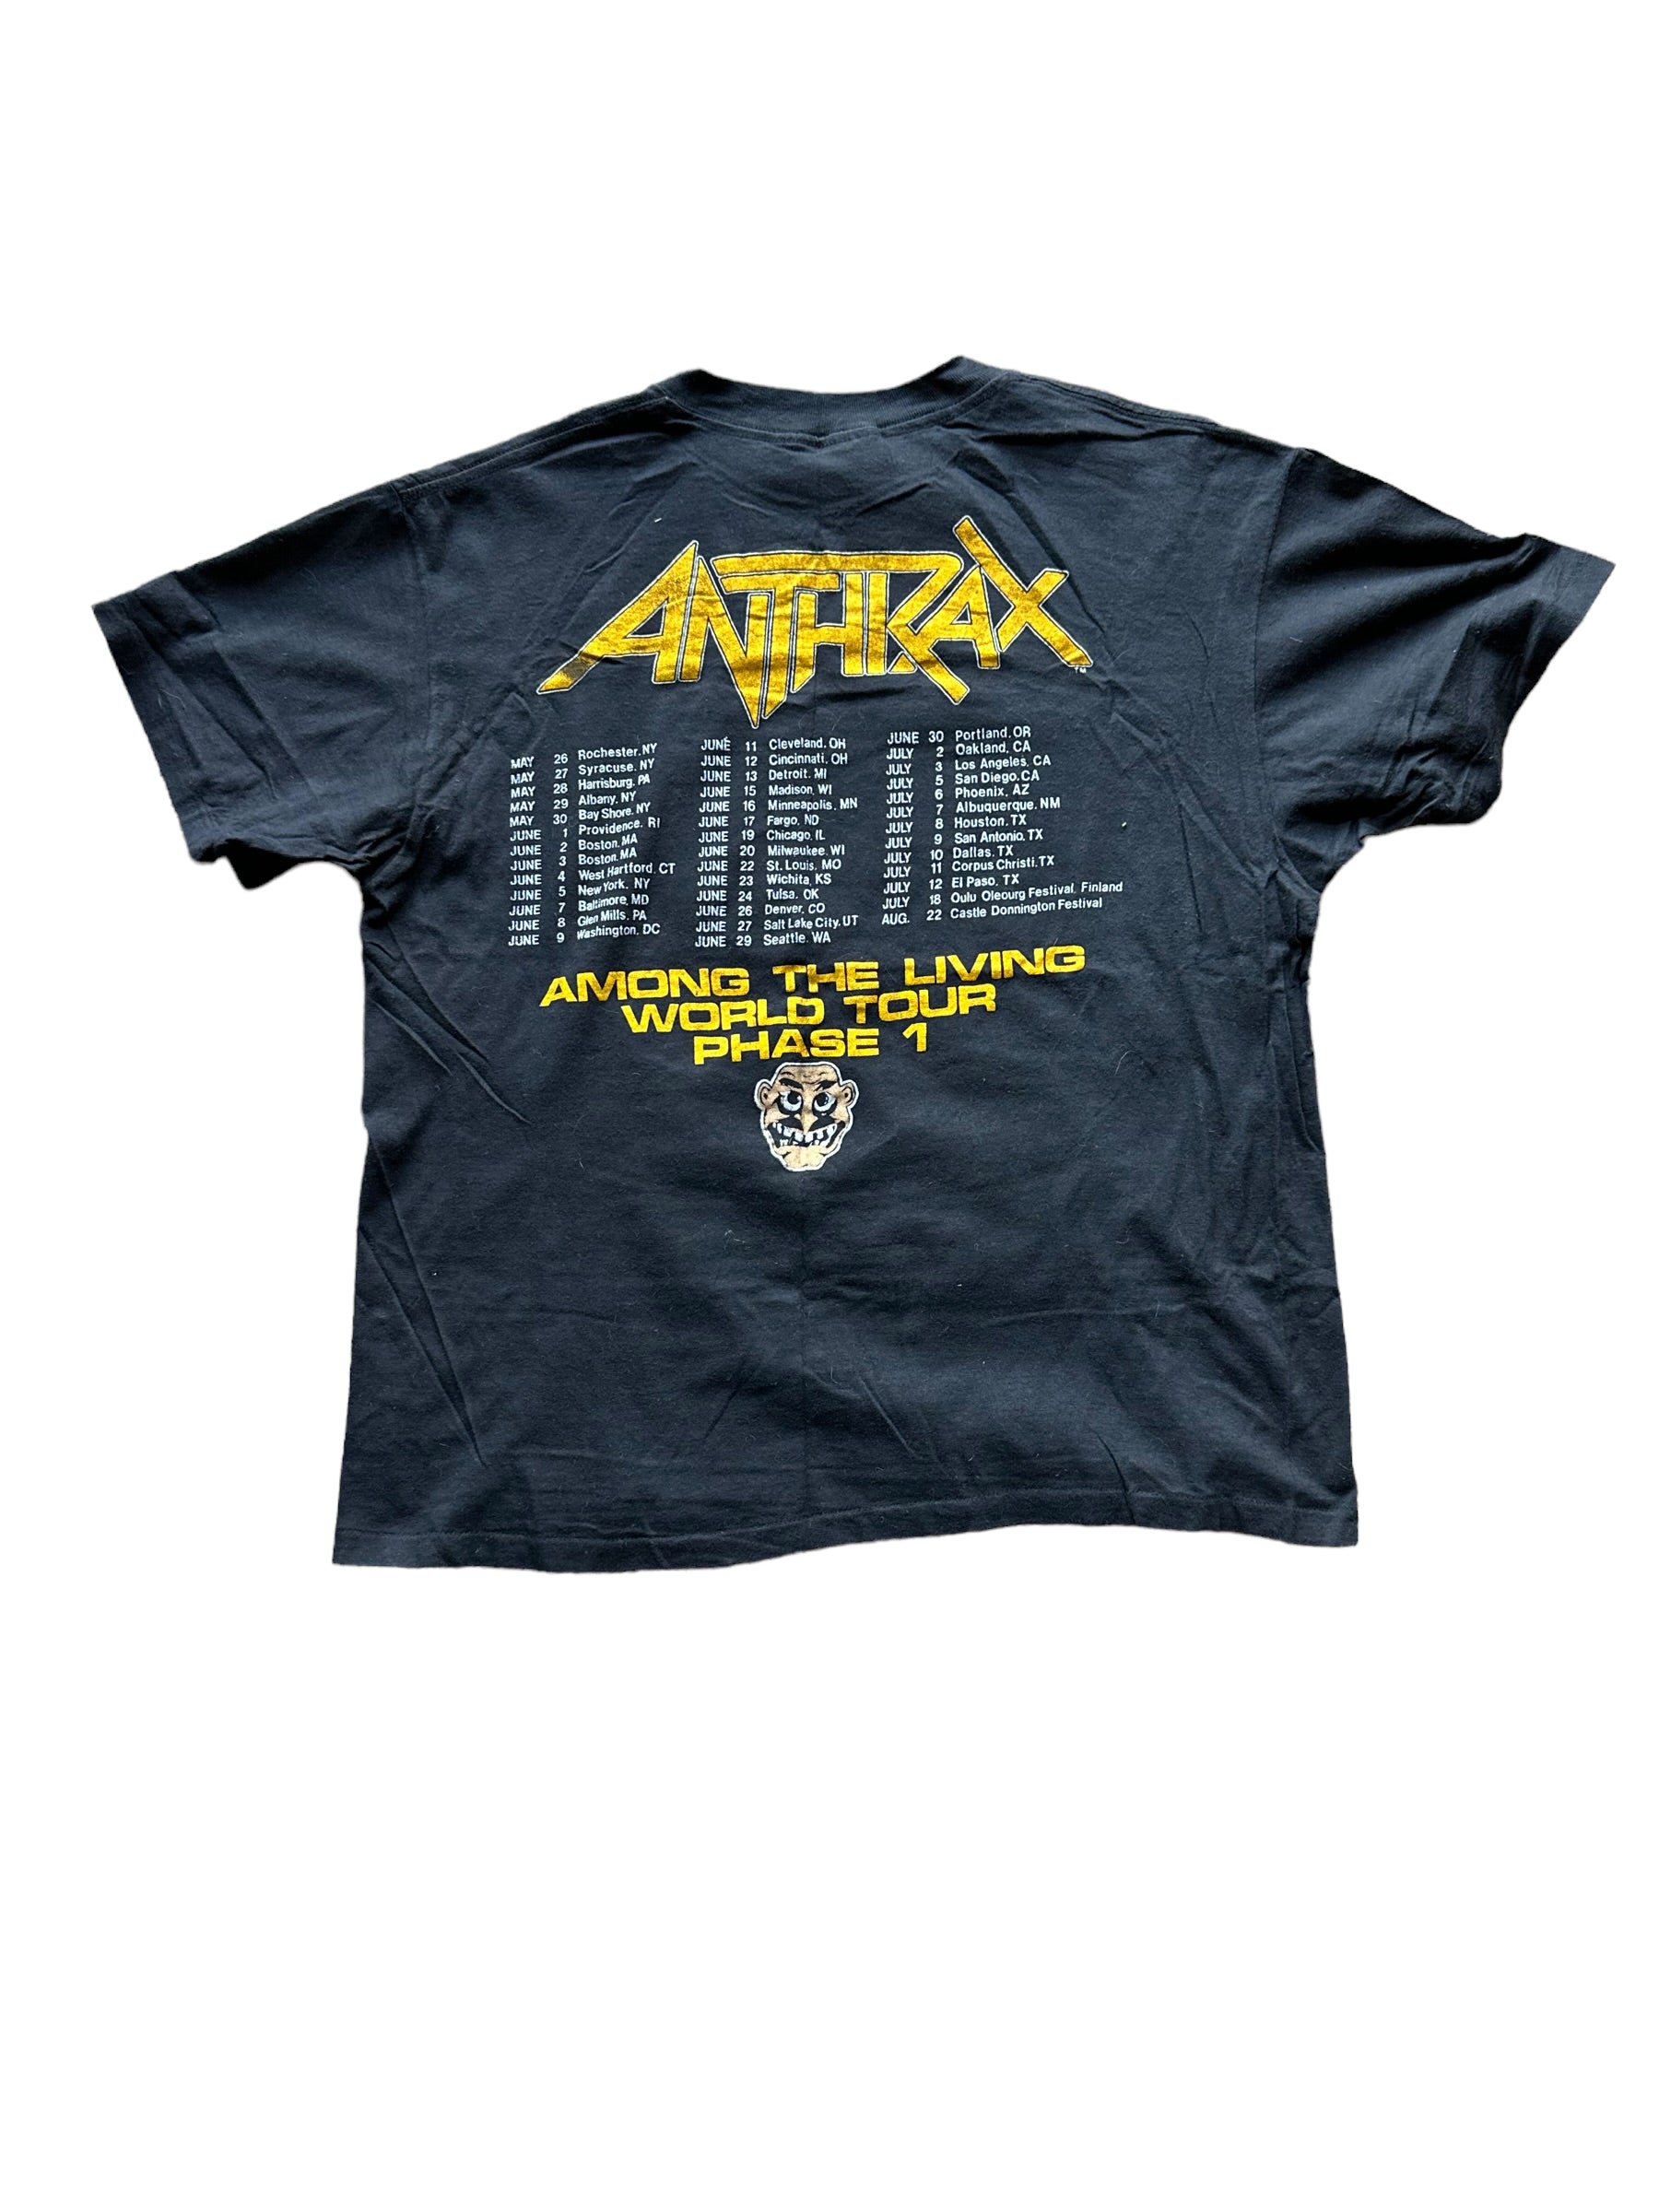 Rear View on Vintage Anthrax Among the Living Tour Shirt Size XL |  Barn Owl Vintage | Vintage Rock Tee